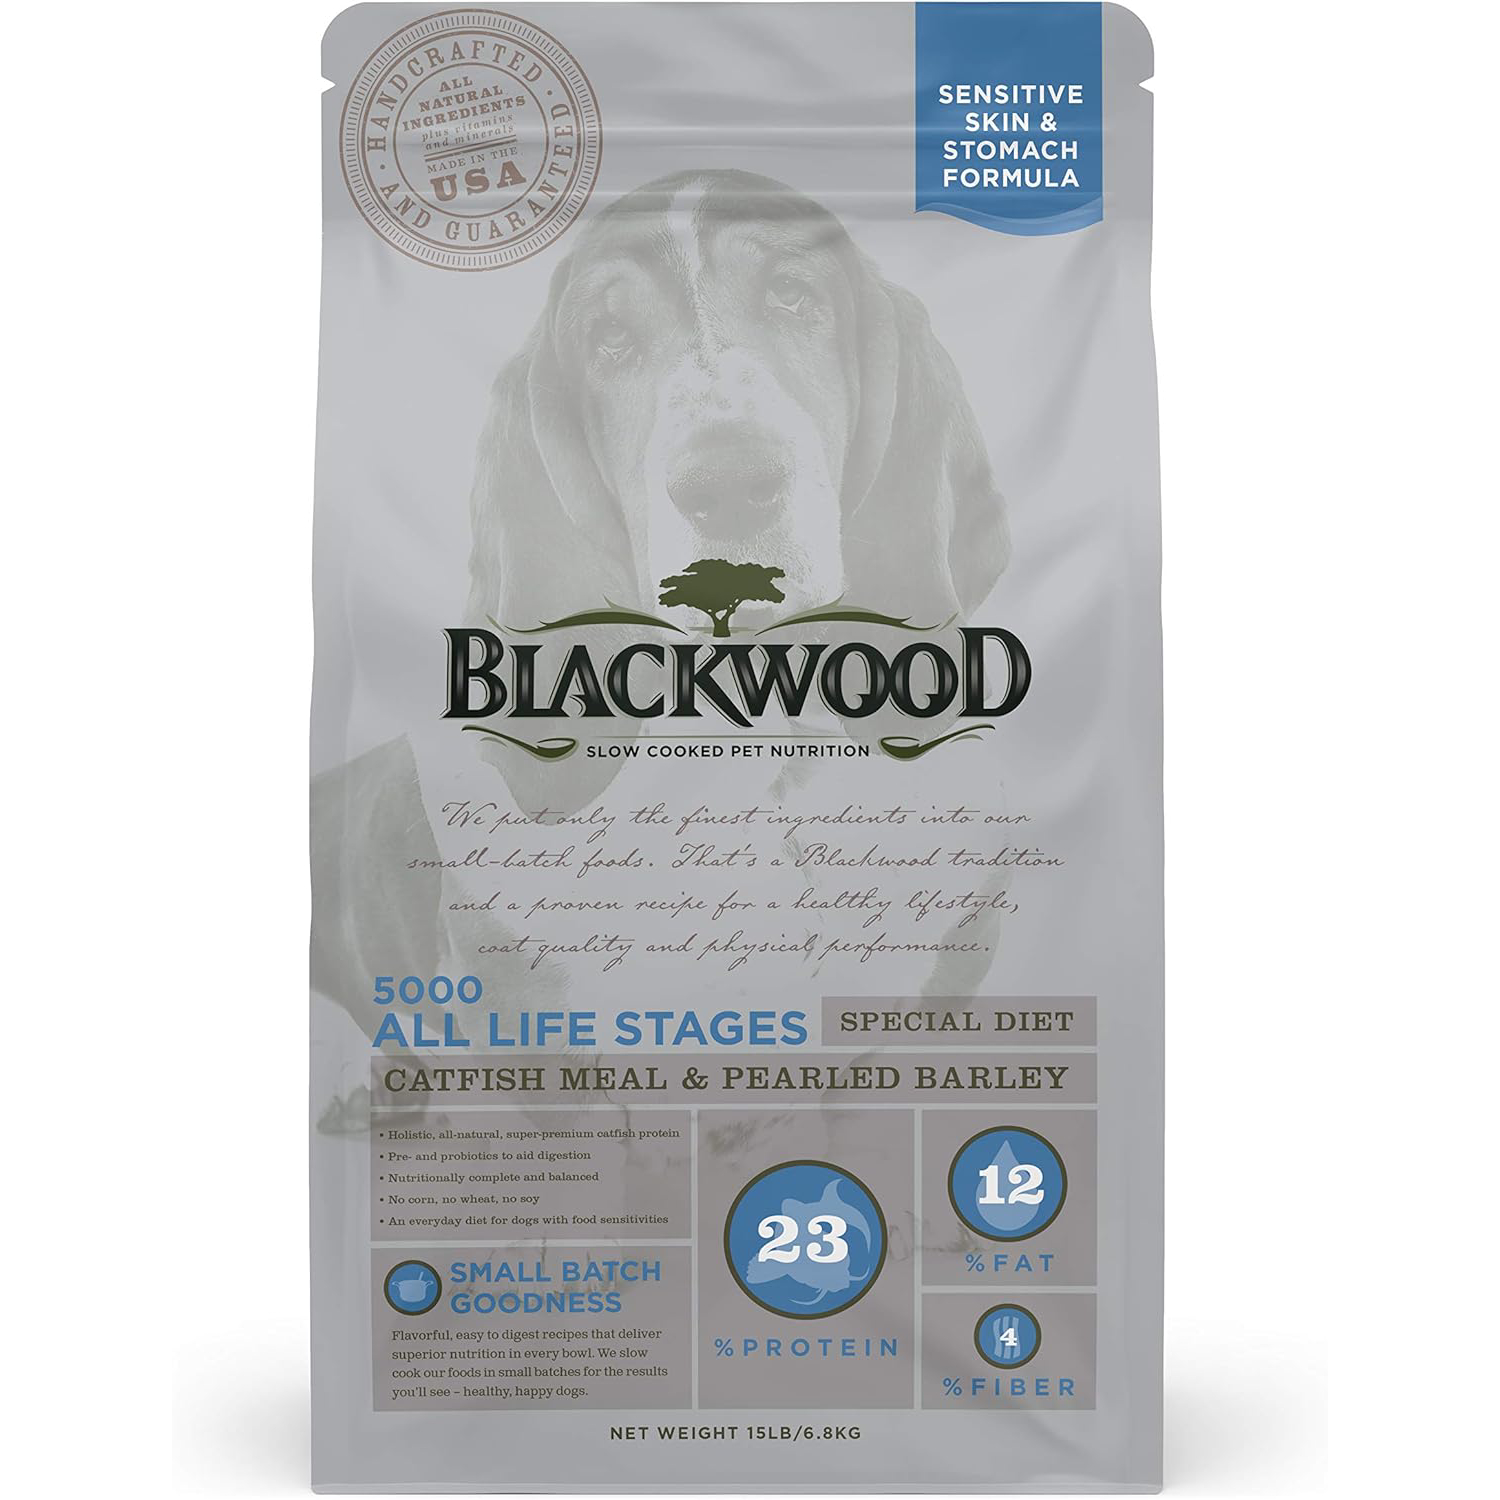 Blackwood Dog Food Made in USA Slow Cooked Dry Dog Food 